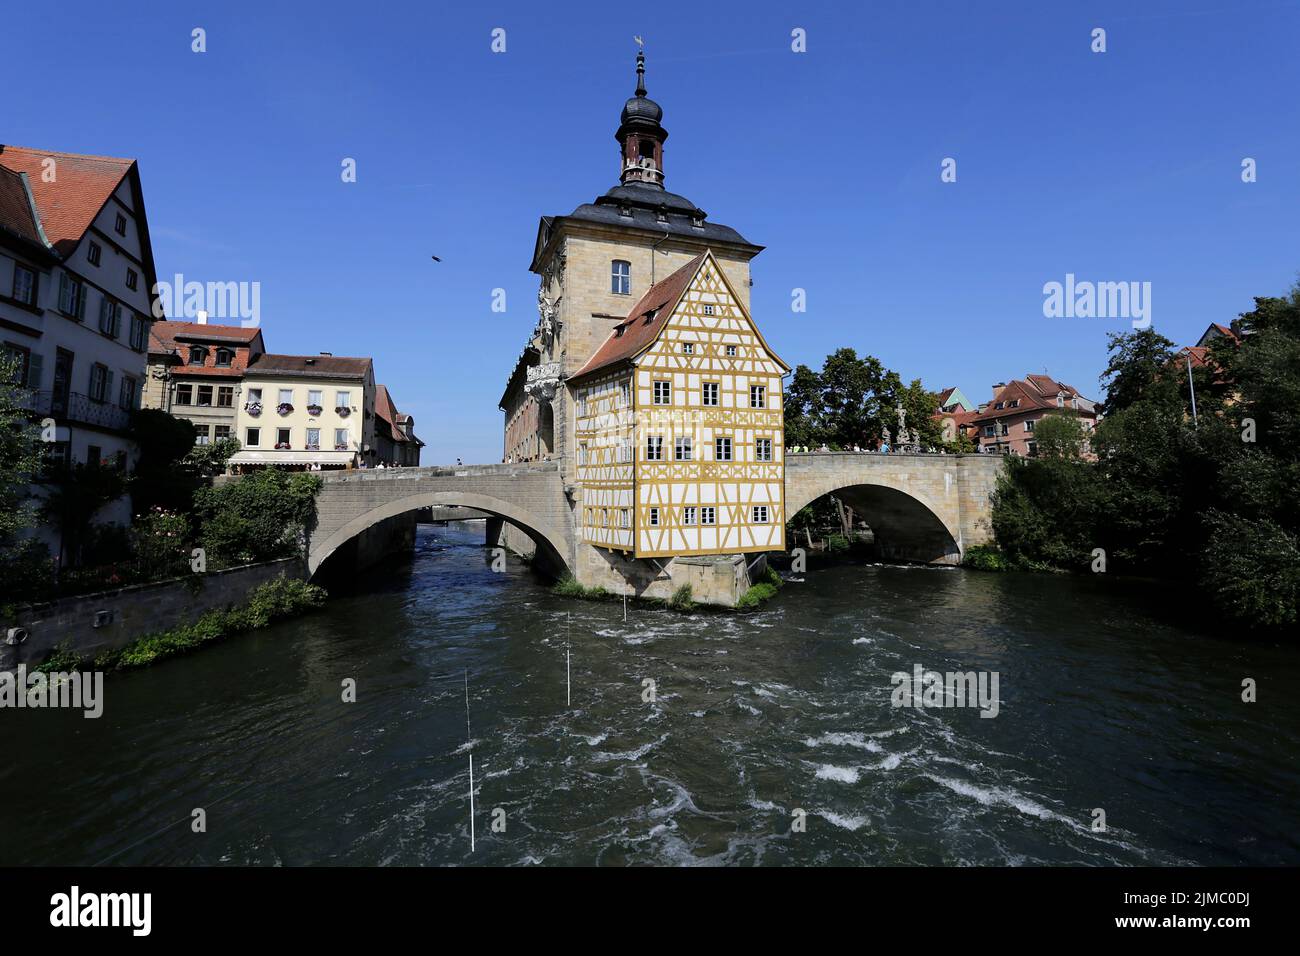 The old town hall Bamberg, Germany Stock Photo